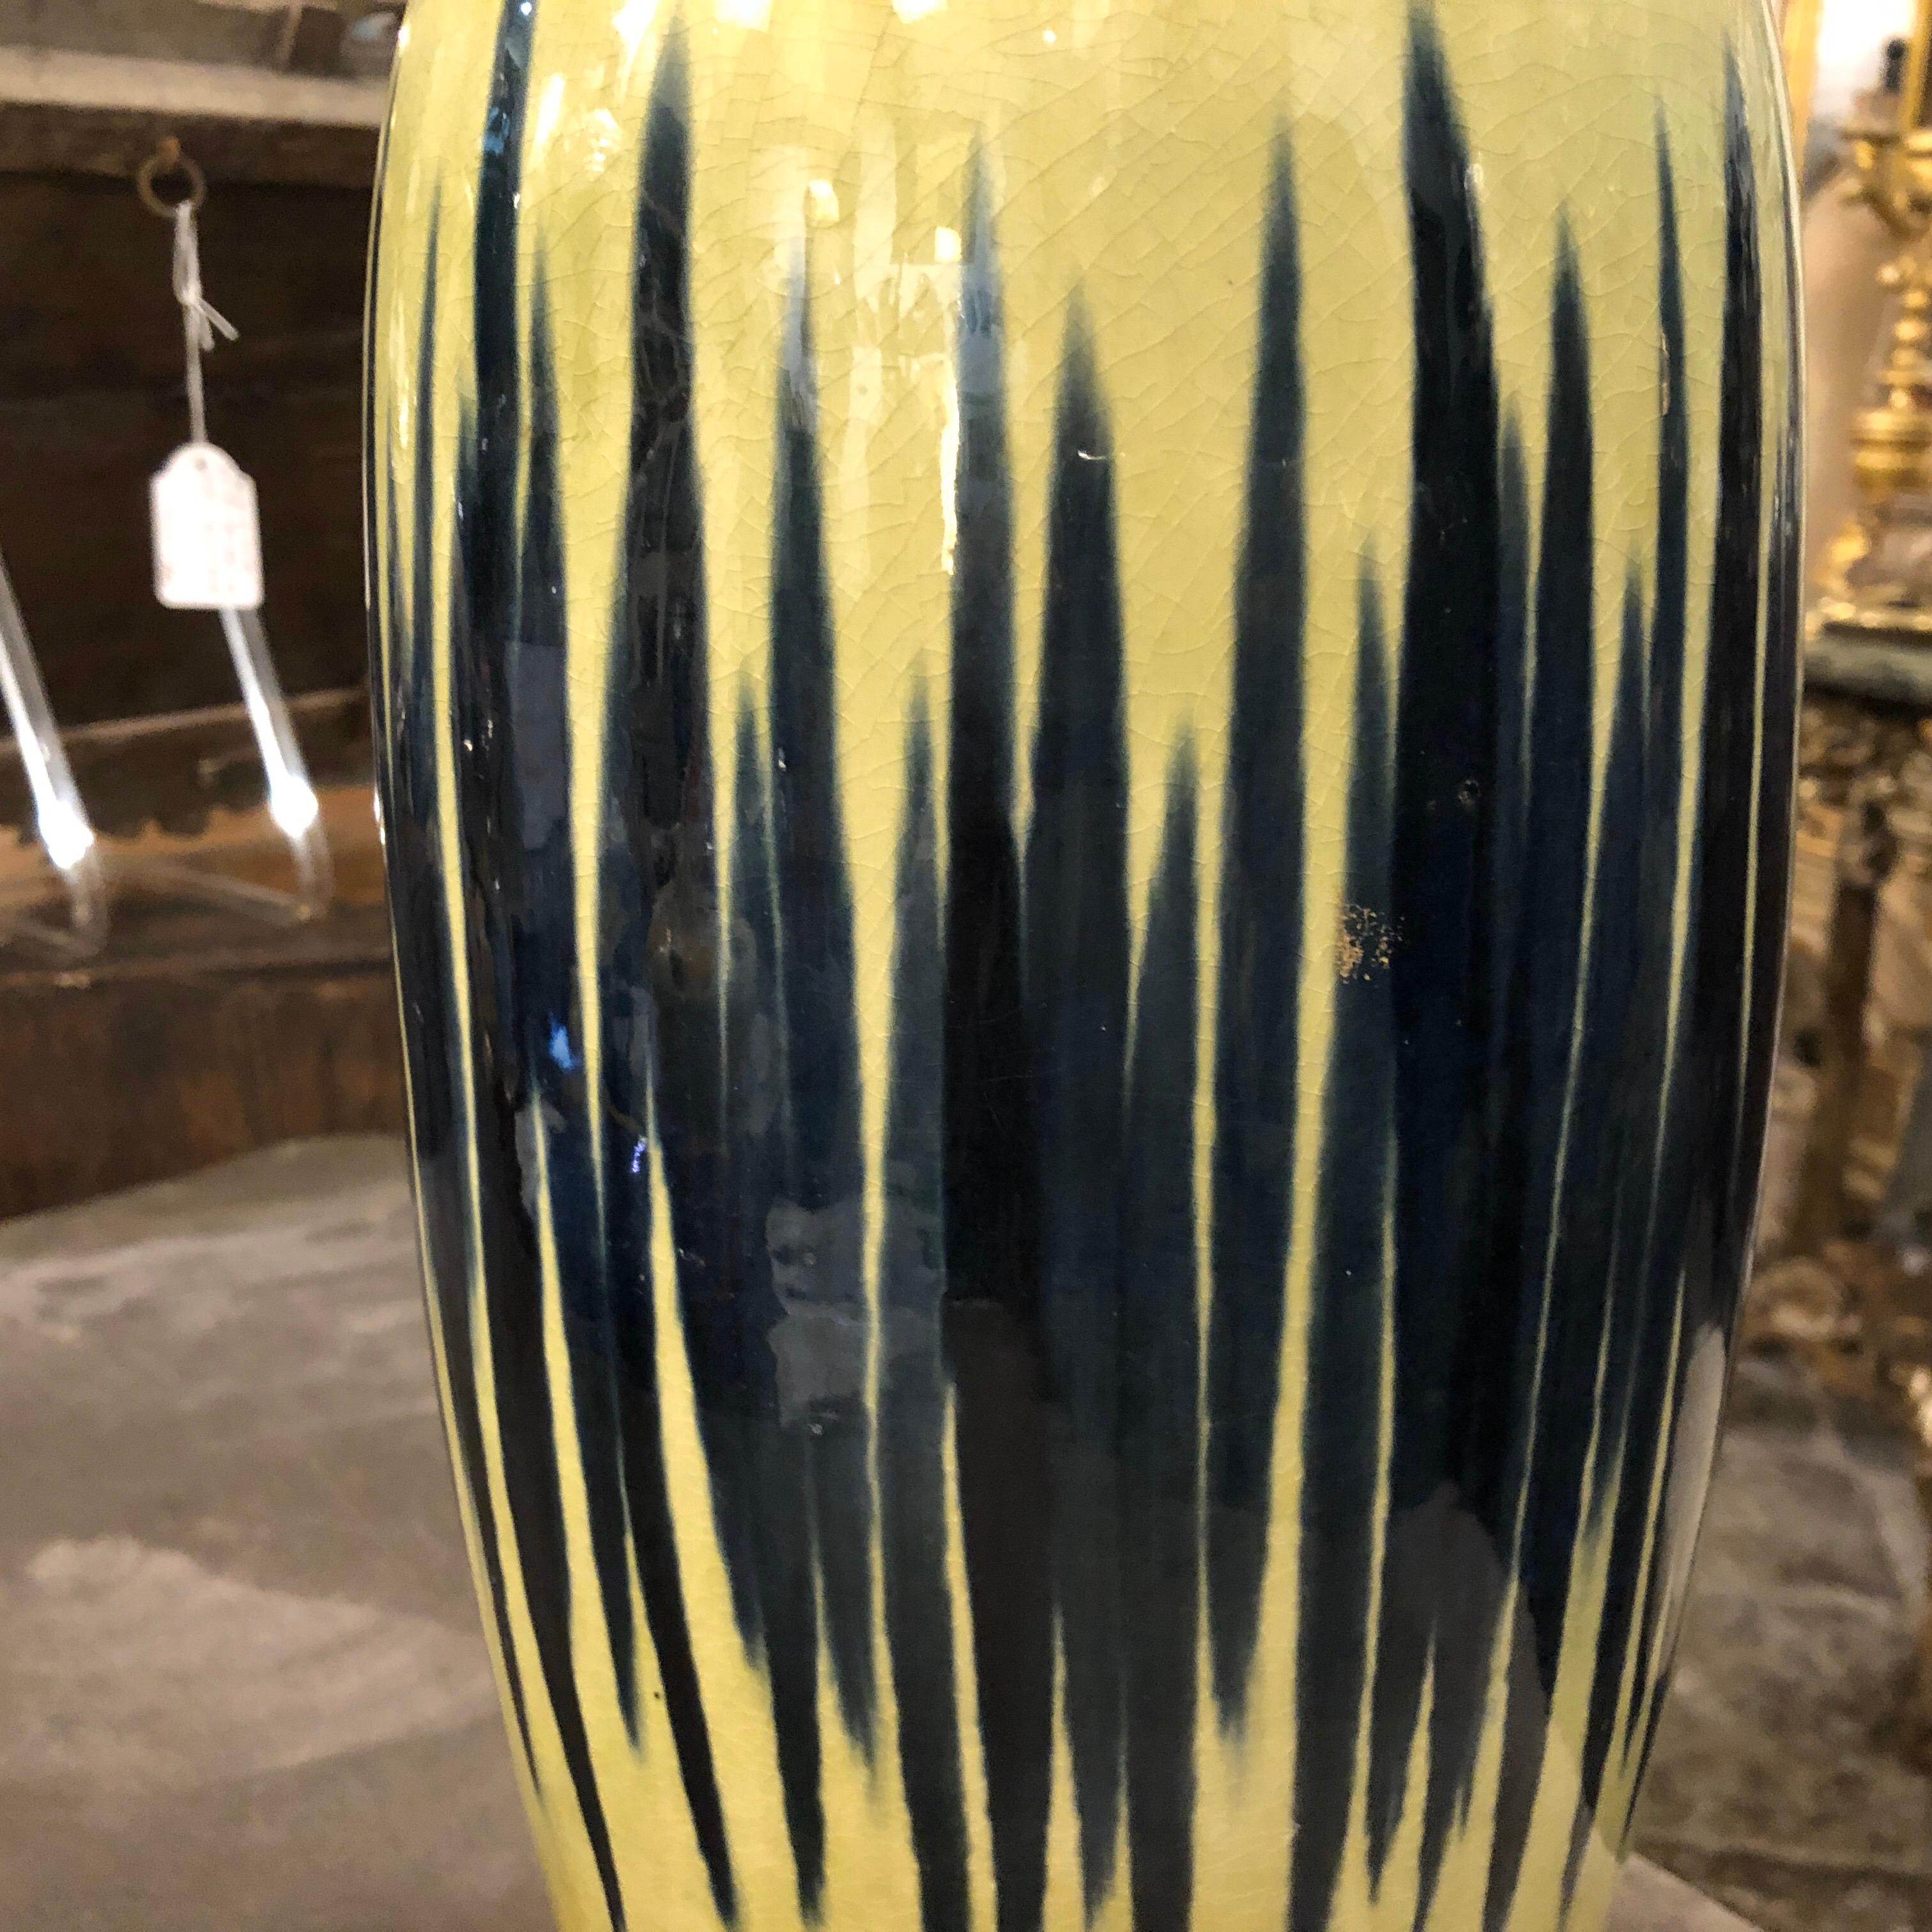 An huge lava keramik vase by Scheurich in perfect condition.